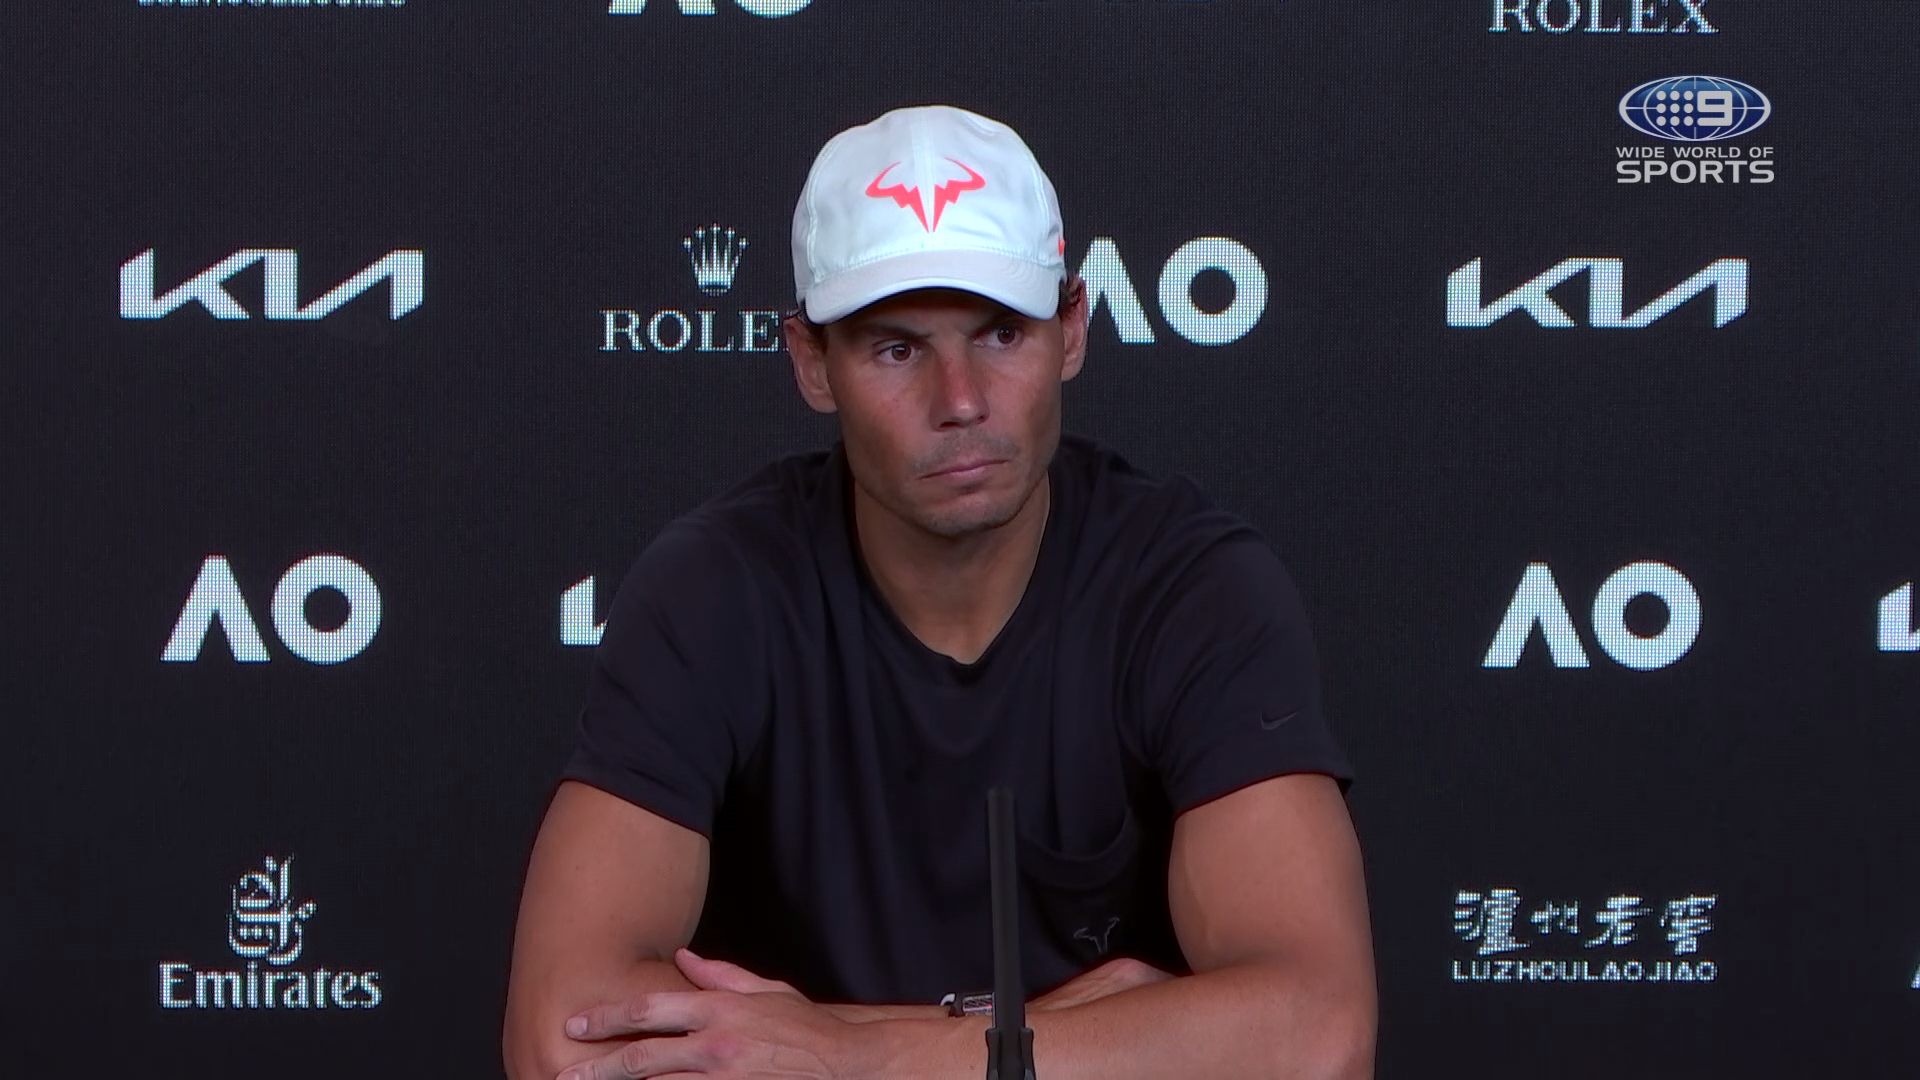 Conflicting reports about Rafa Nadal's absence at Acapulco ATP tournament